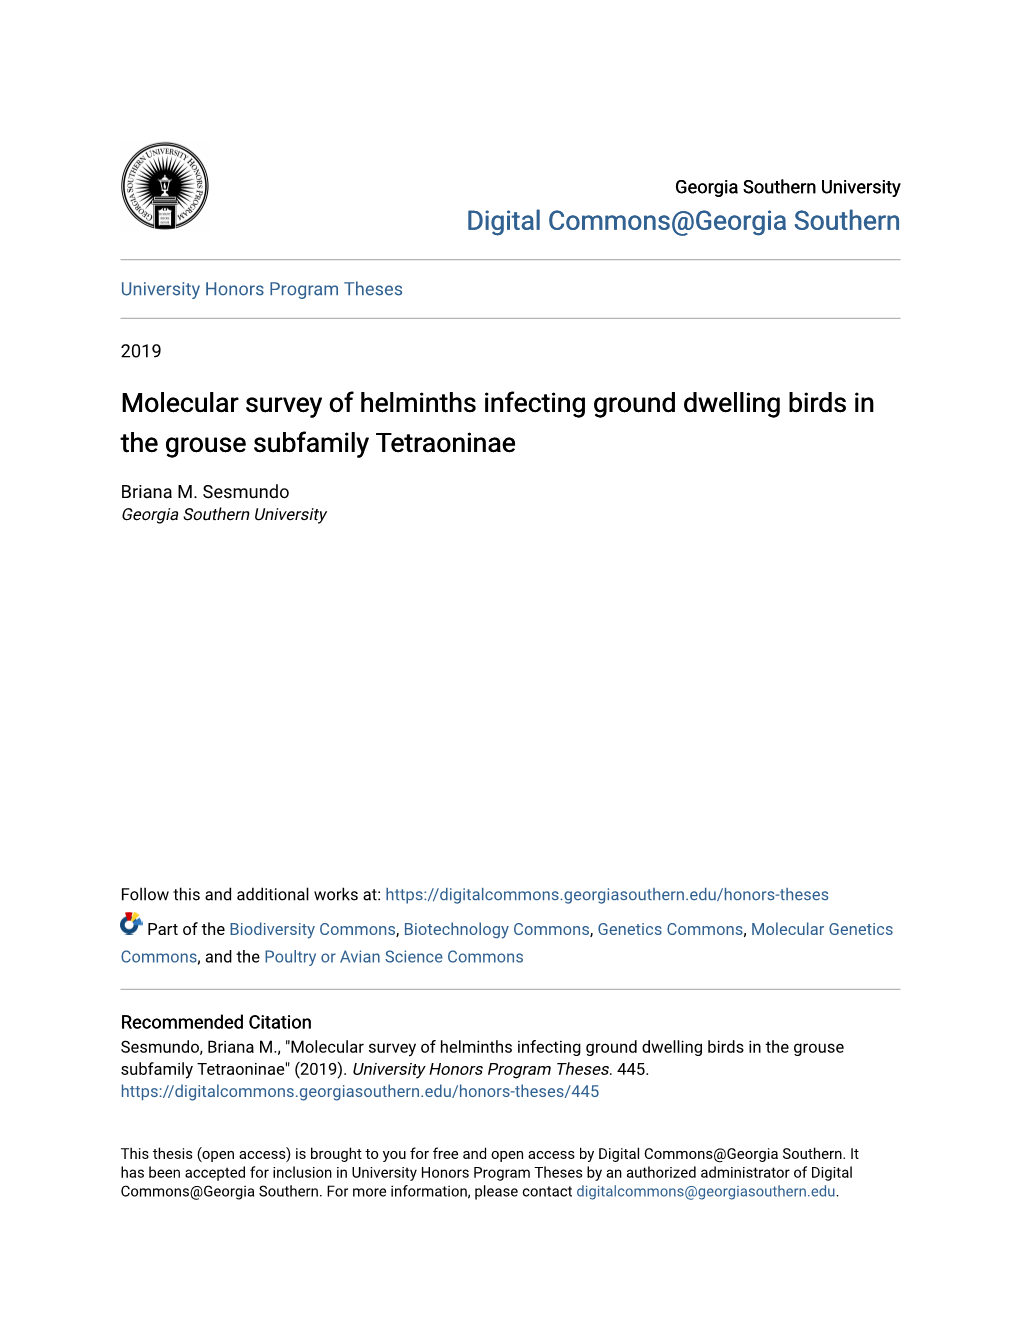 Molecular Survey of Helminths Infecting Ground Dwelling Birds in the Grouse Subfamily Tetraoninae